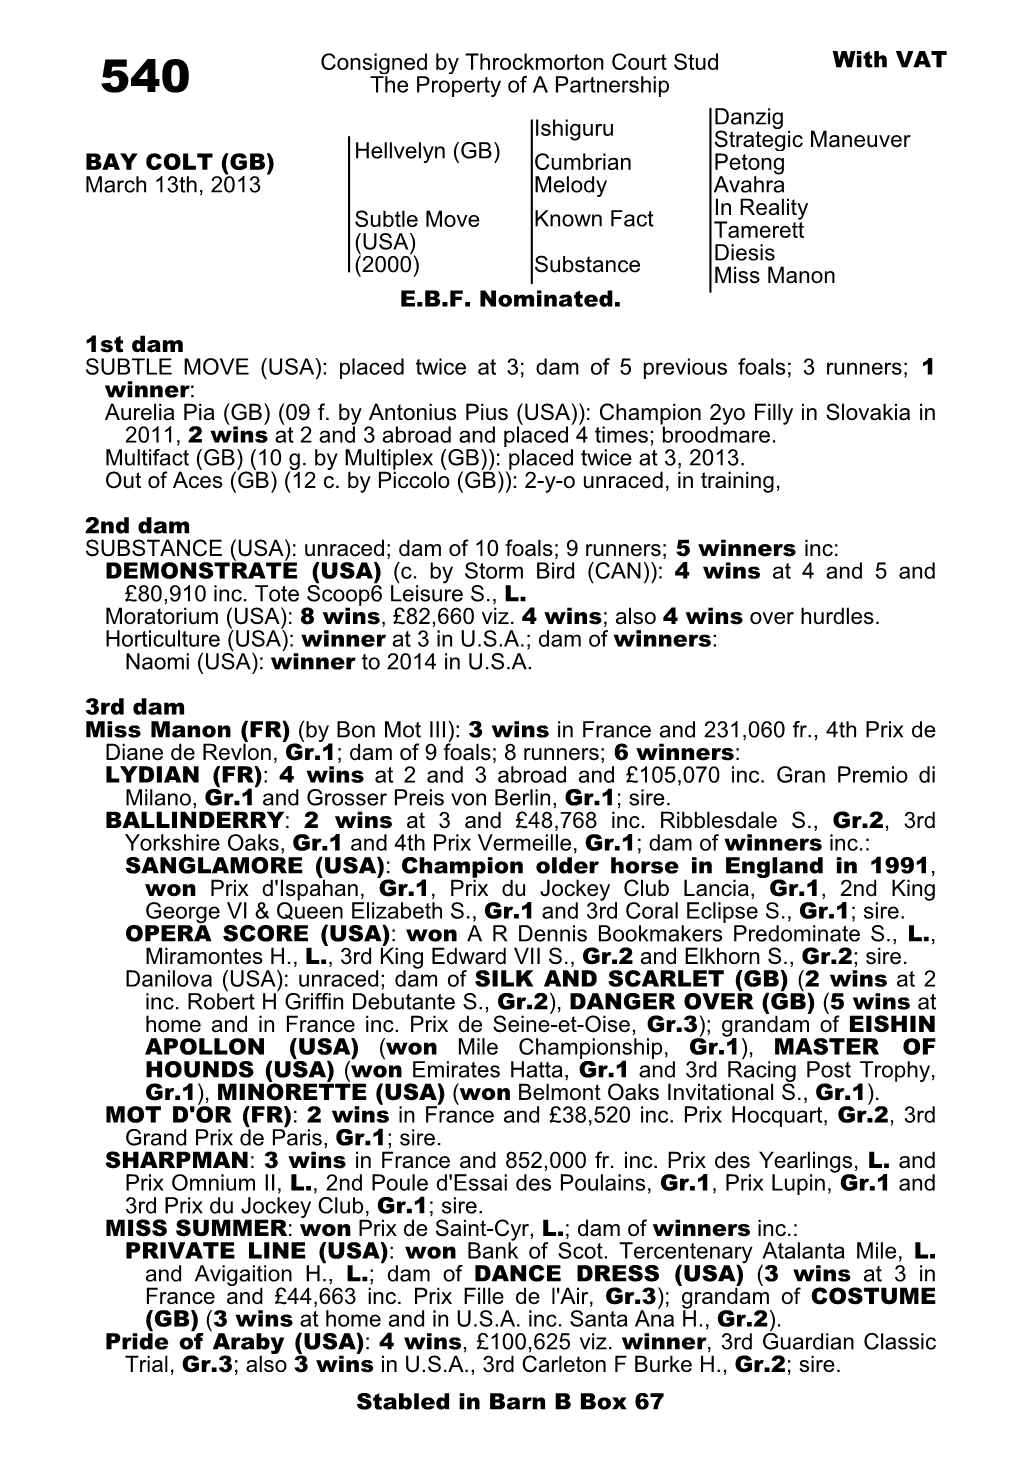 0101Y98.DSI 00Subtle Move (USA)|2013|C|A|2378445 Consigned by Throckmorton Court Stud with VAT 540 the Property of a Partnership